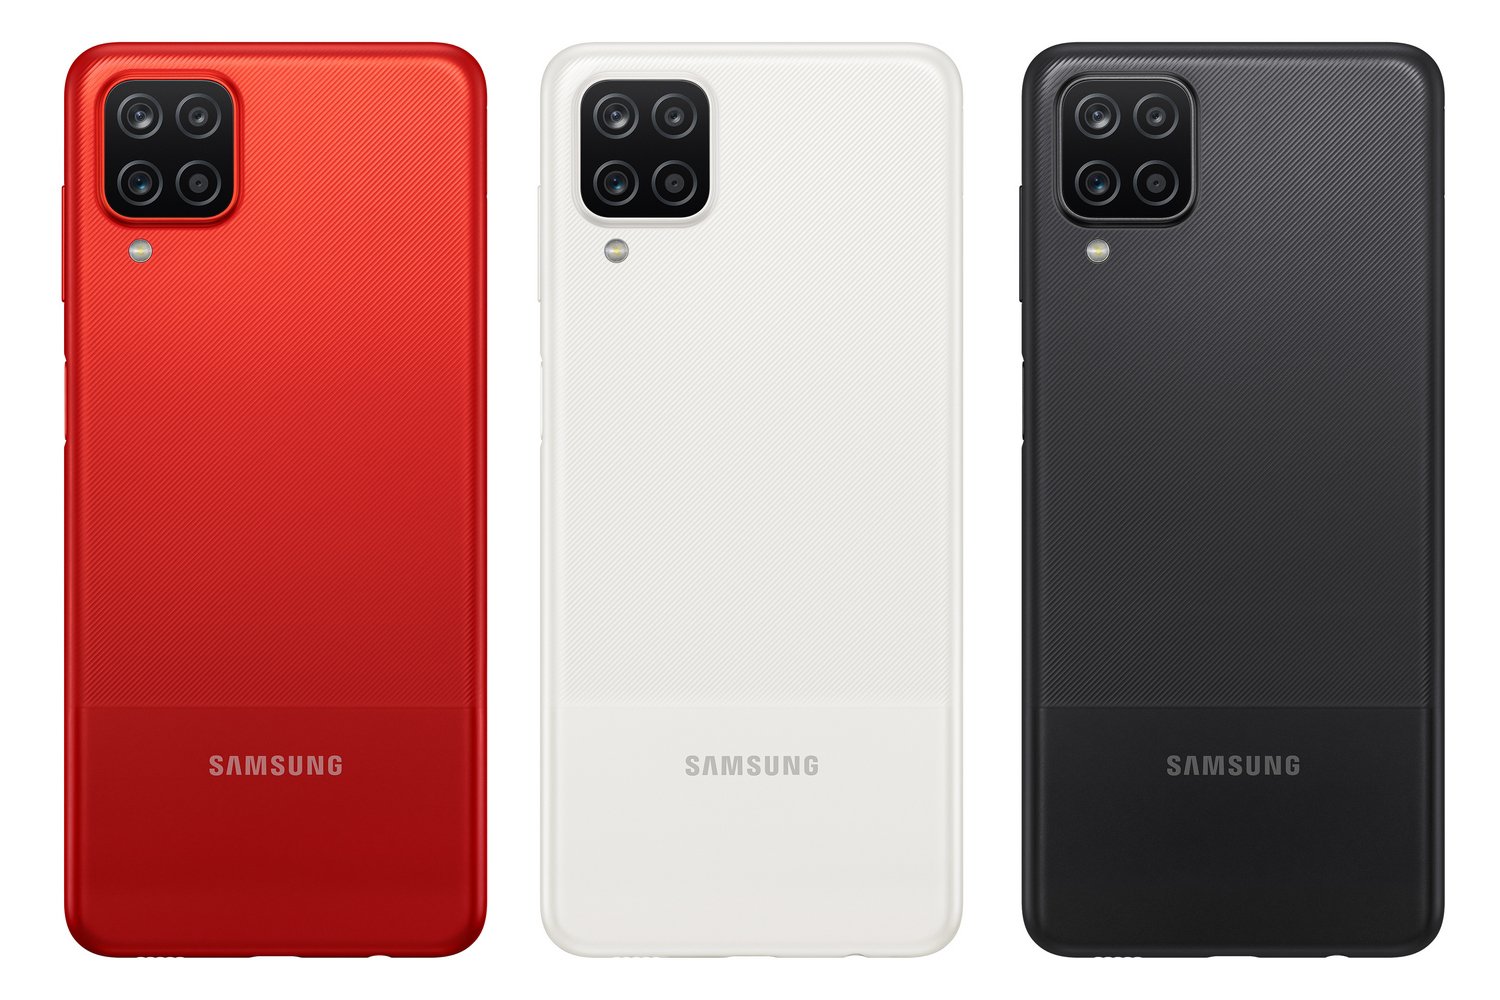 Samsung Galaxy A12 starts getting the Android 11 update - SamMobile